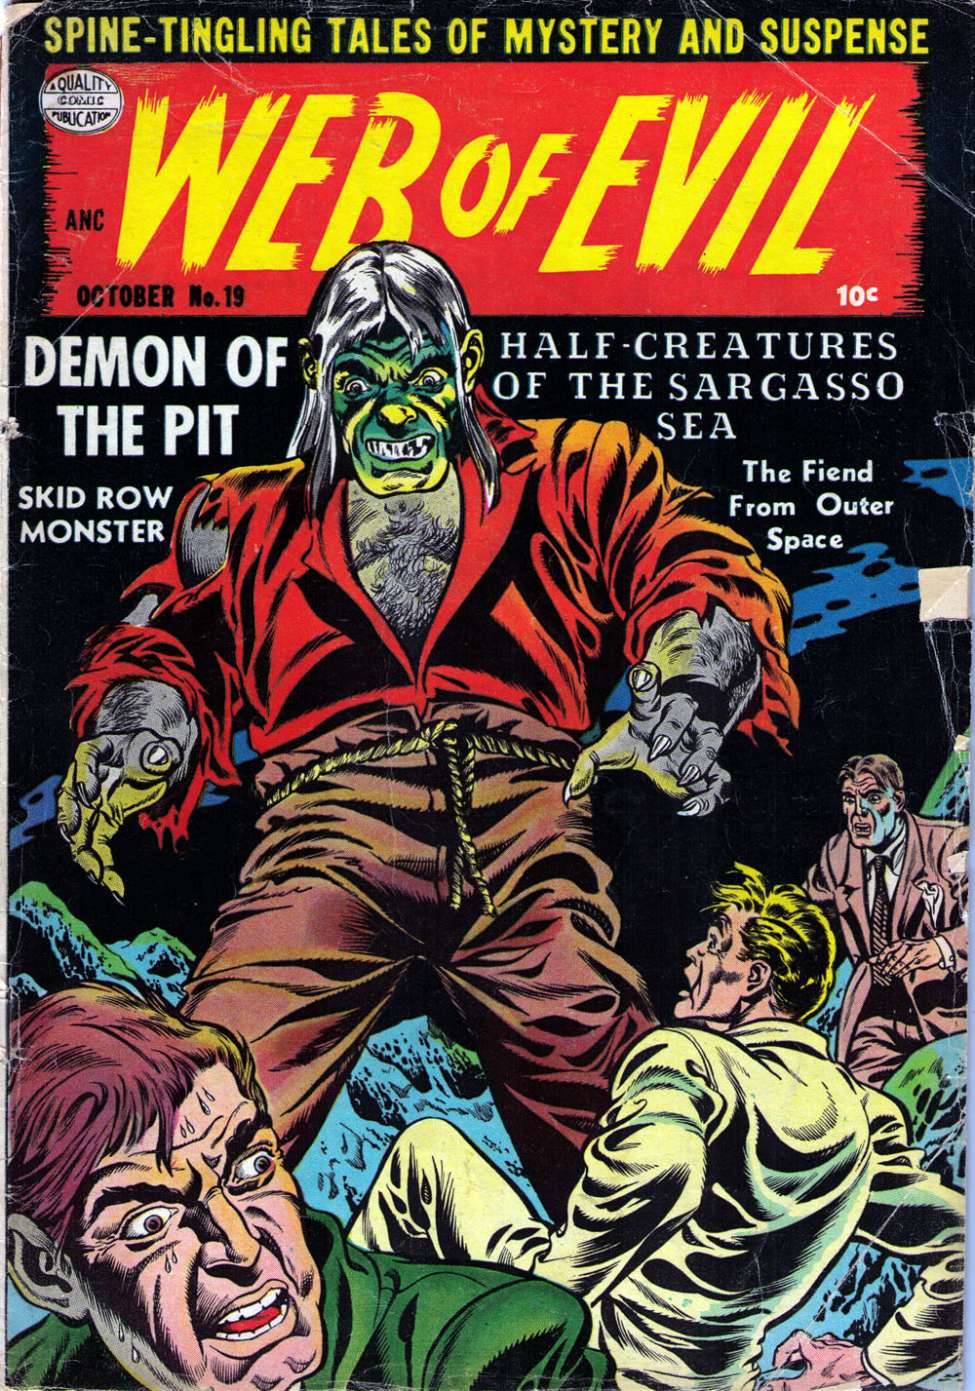 Comic Book Cover For Web of Evil 19